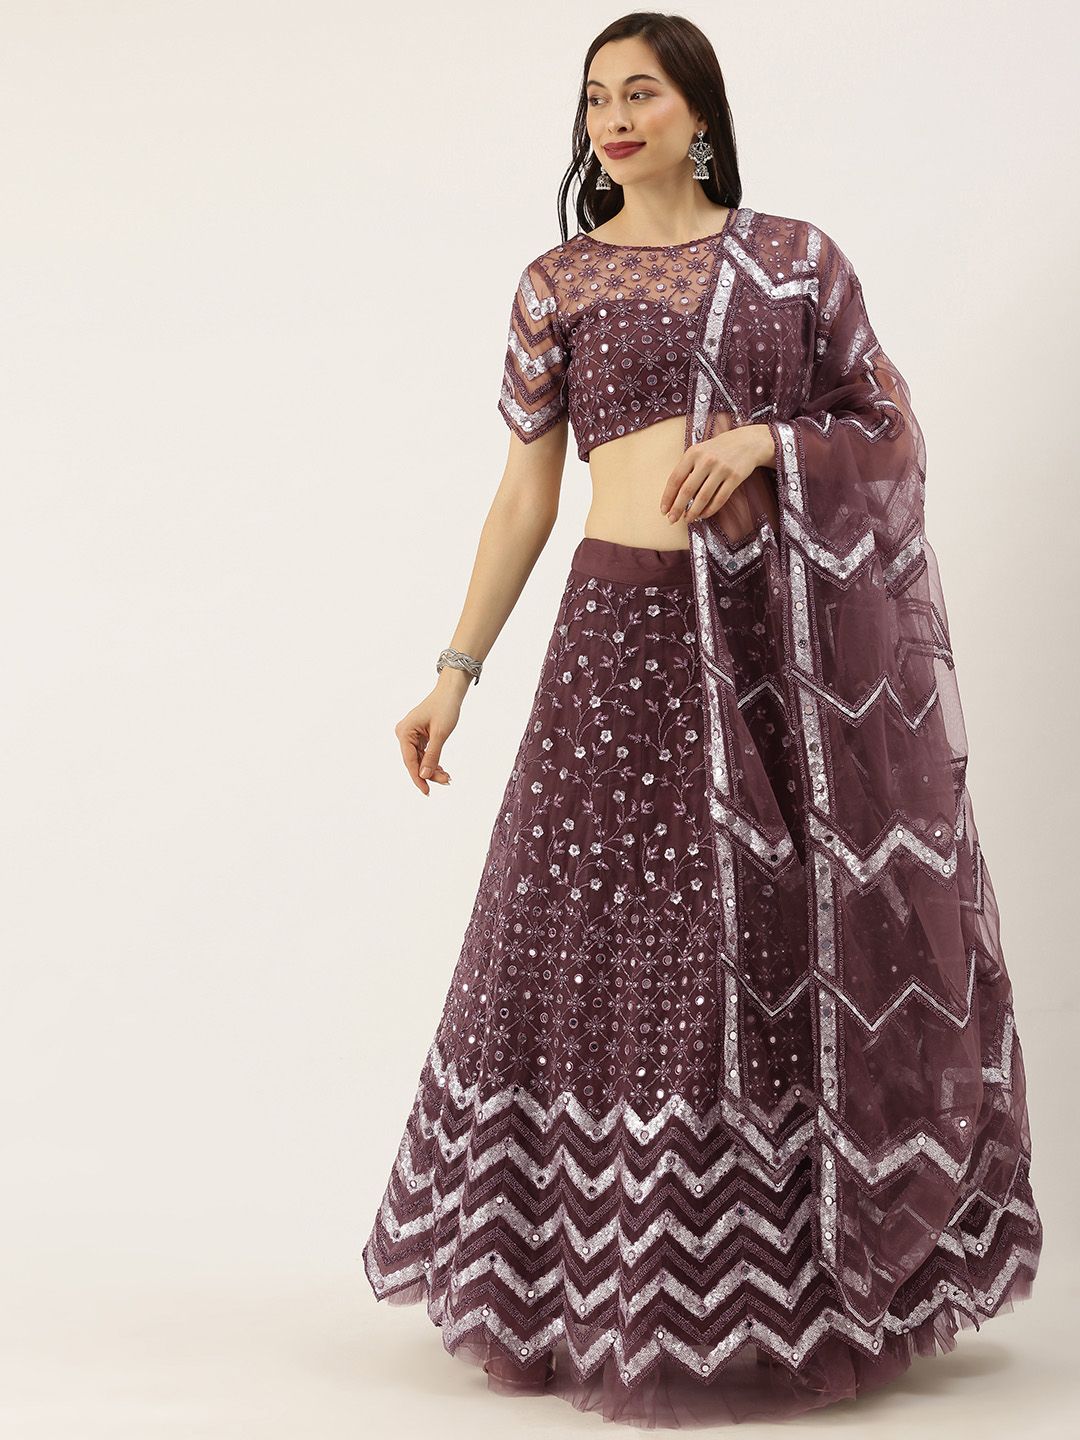 panchhi Burgundy Embroidered Semi-Stitched Lehenga & Blouse with Dupatta Price in India